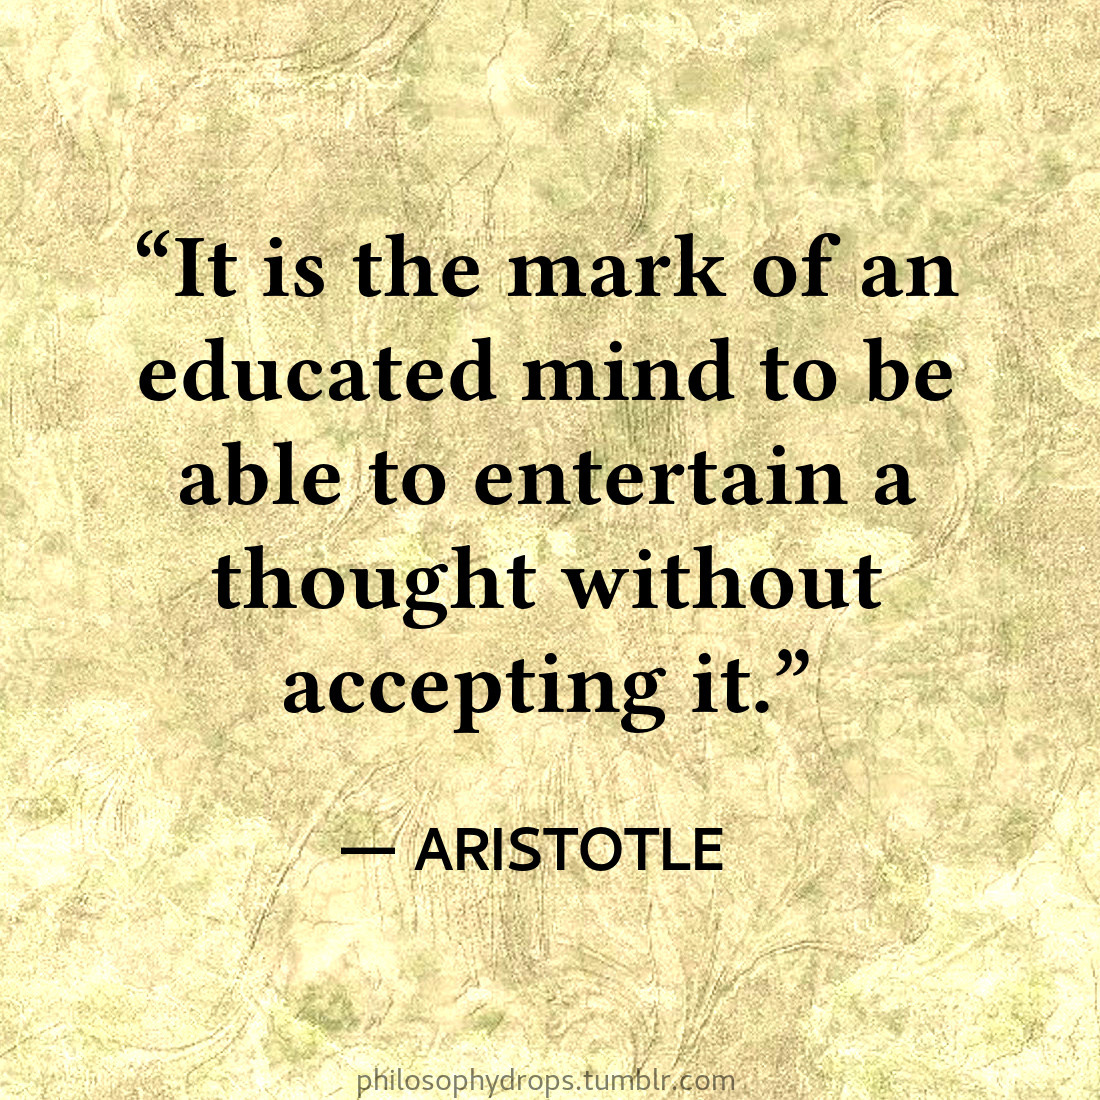 “It is the mark of an educated mind to be able to entertain a thought without accepting it.” – Aristotle